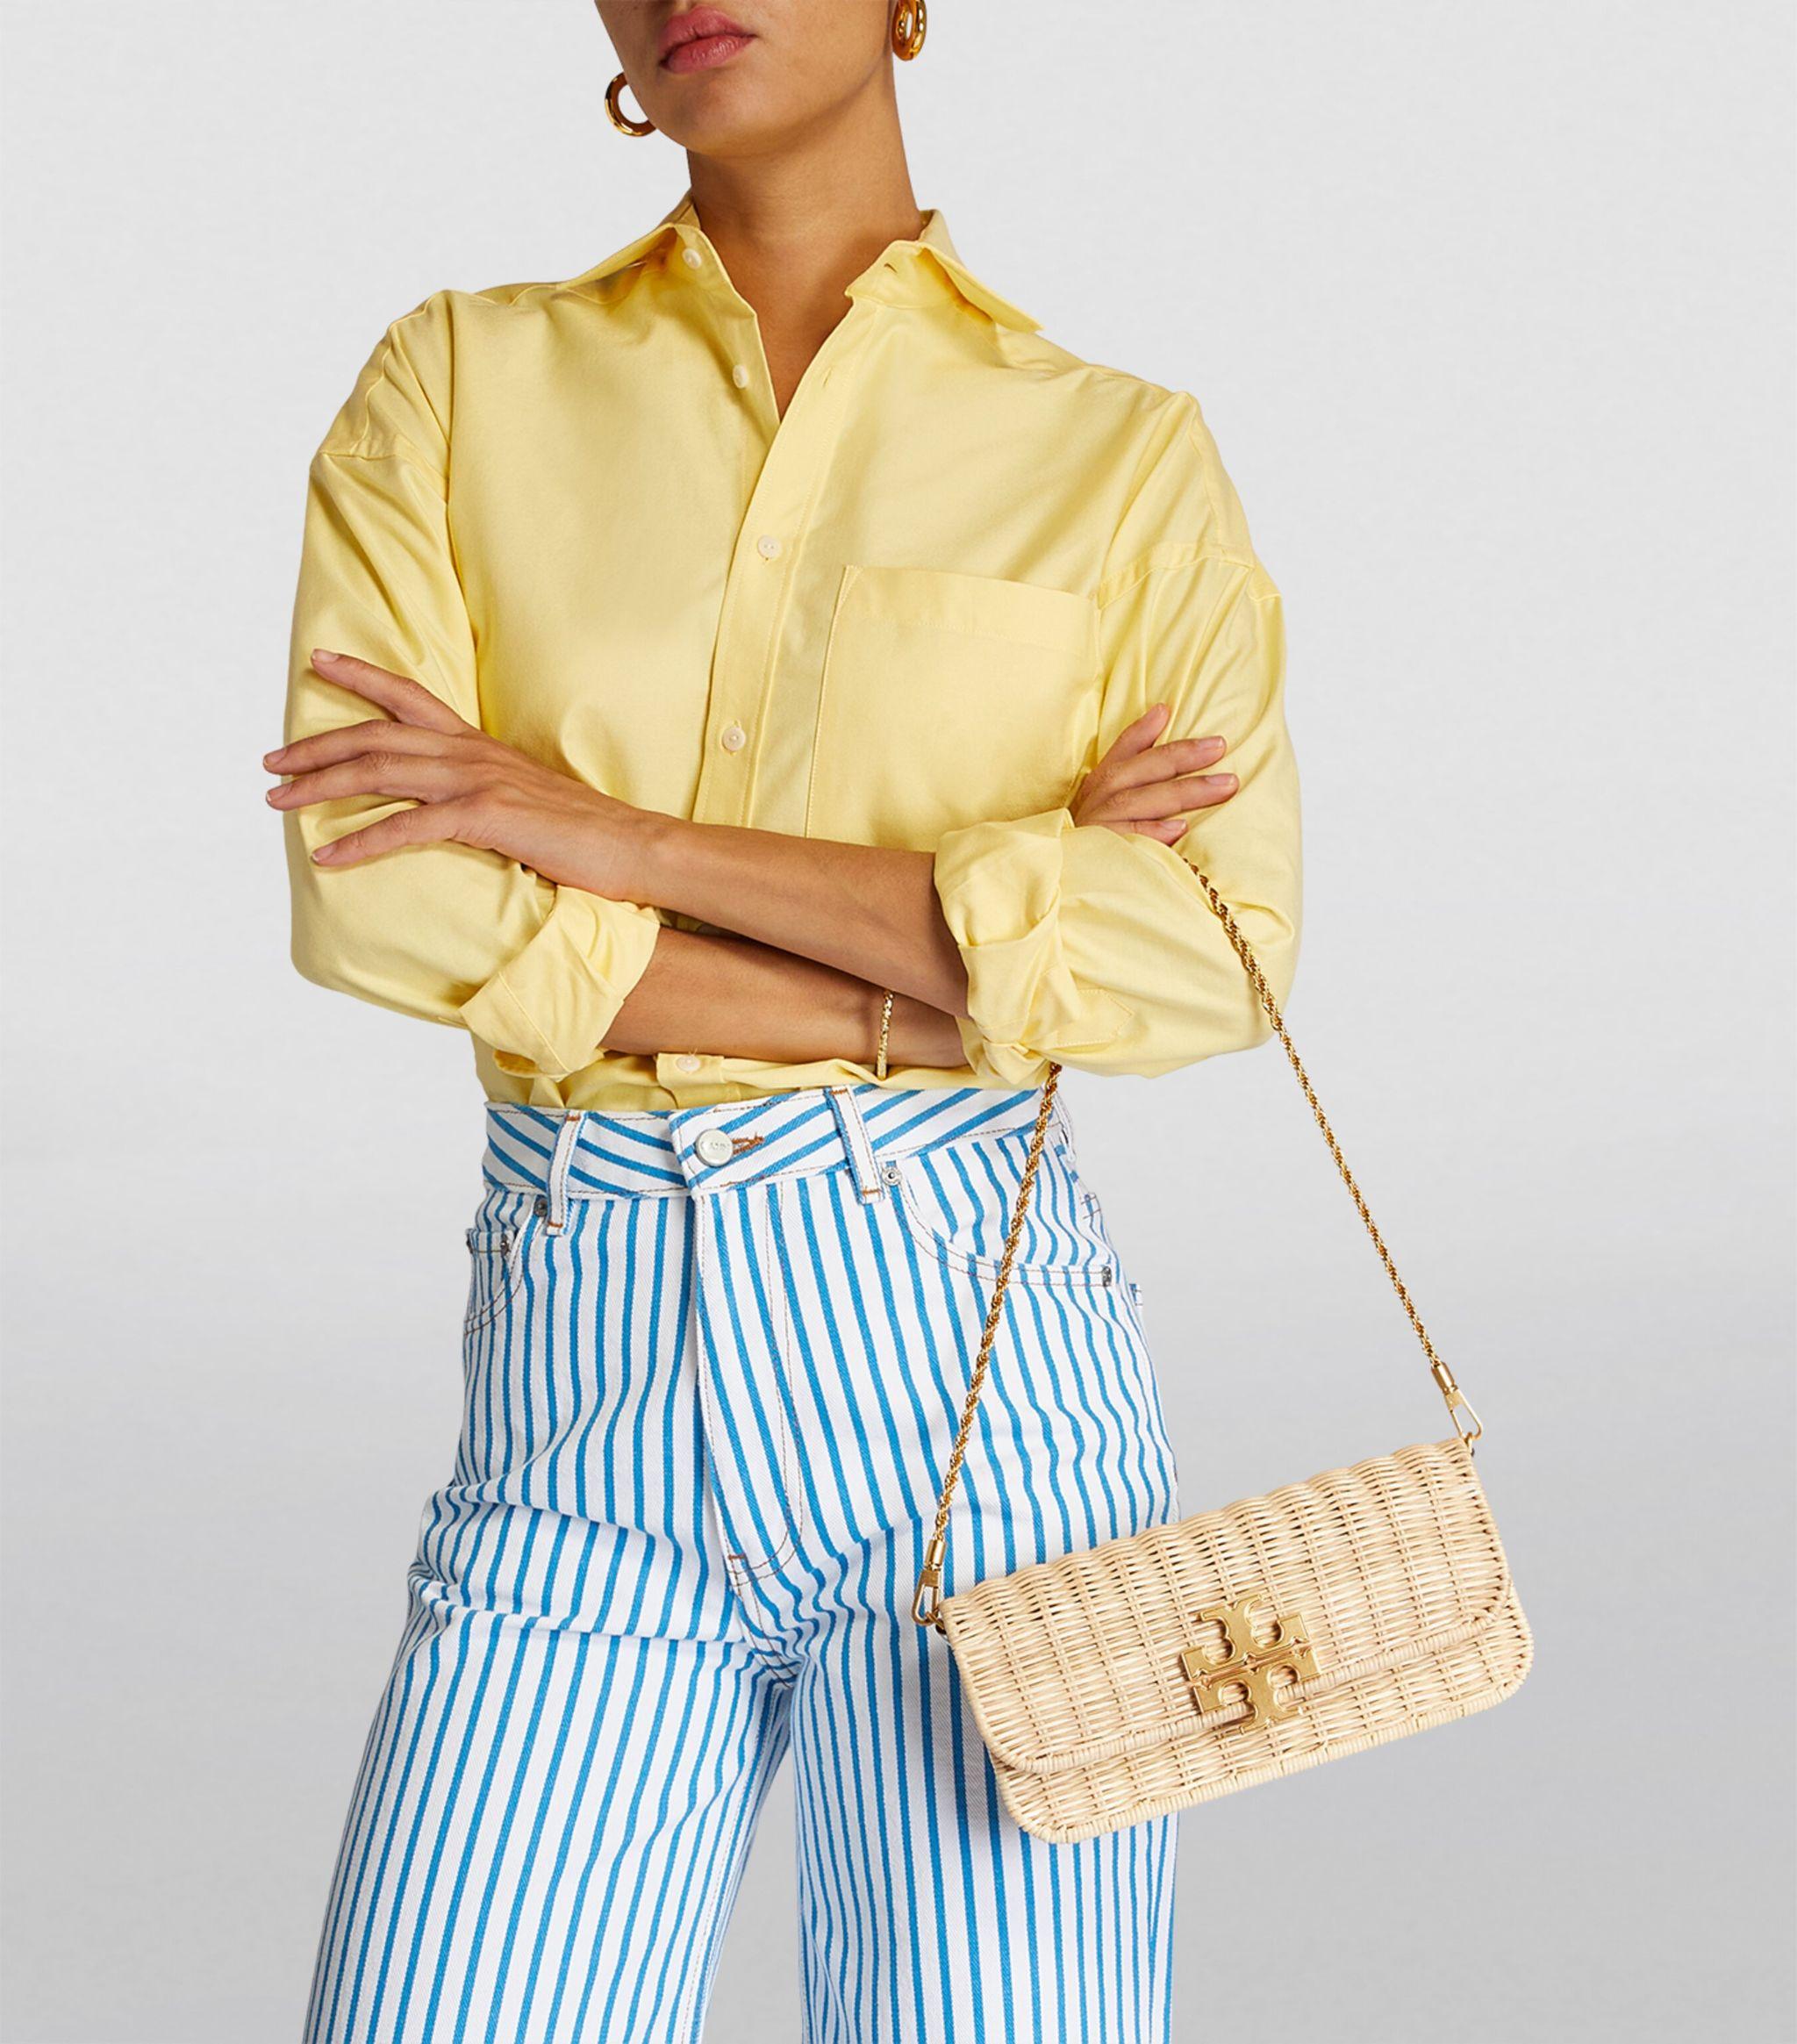 Tory Burch on X: The perfect summer handbag. The Eleanor Bags are